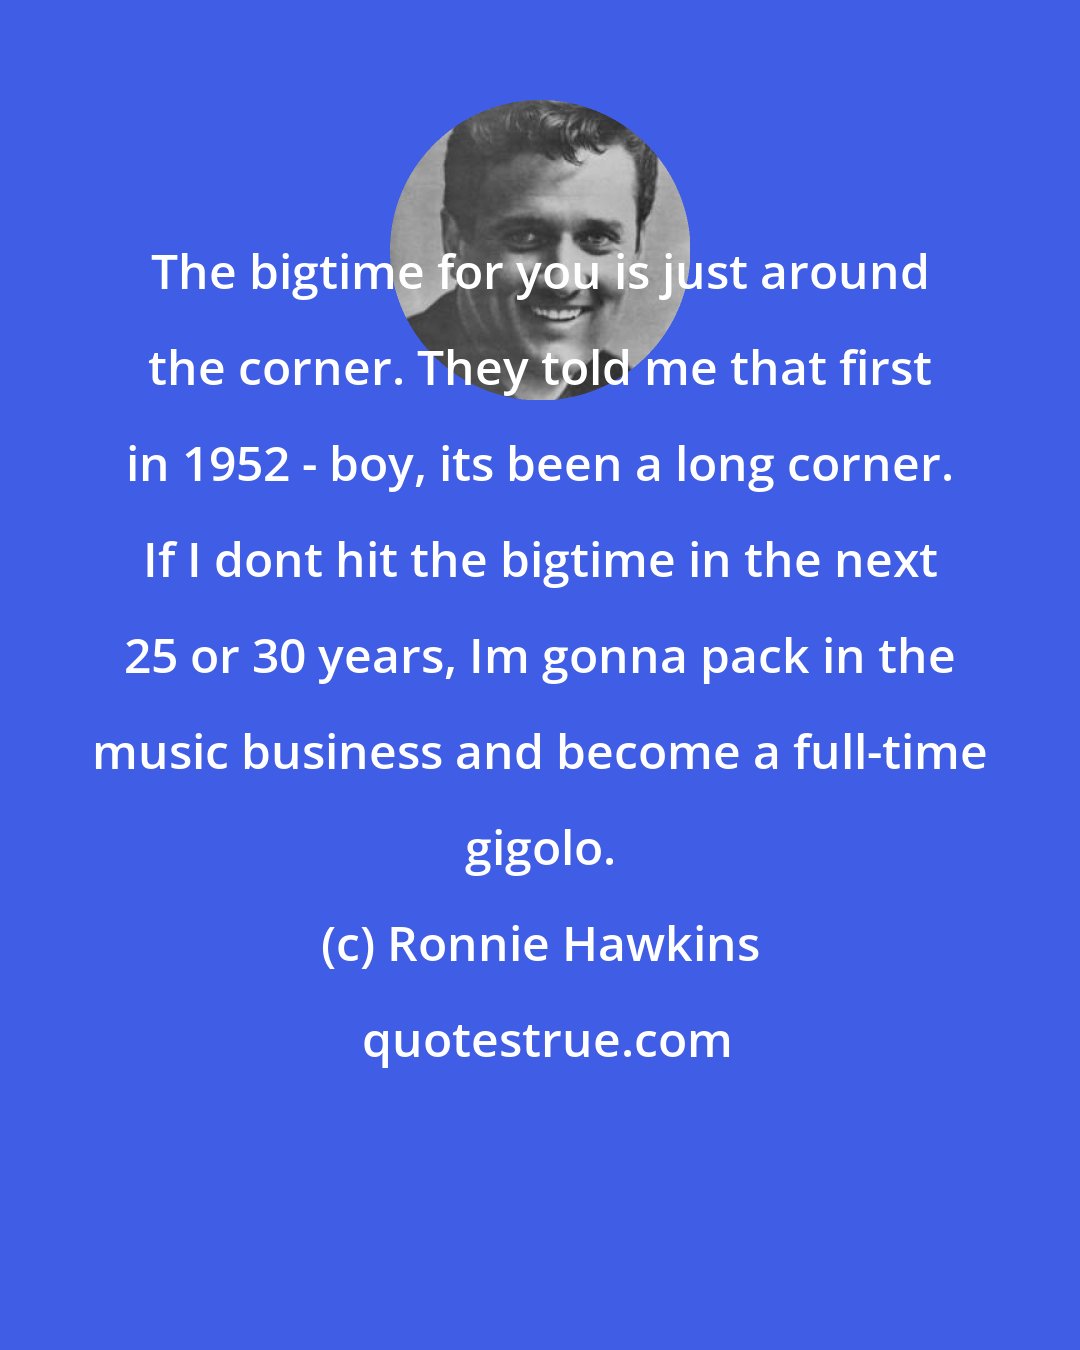 Ronnie Hawkins: The bigtime for you is just around the corner. They told me that first in 1952 - boy, its been a long corner. If I dont hit the bigtime in the next 25 or 30 years, Im gonna pack in the music business and become a full-time gigolo.